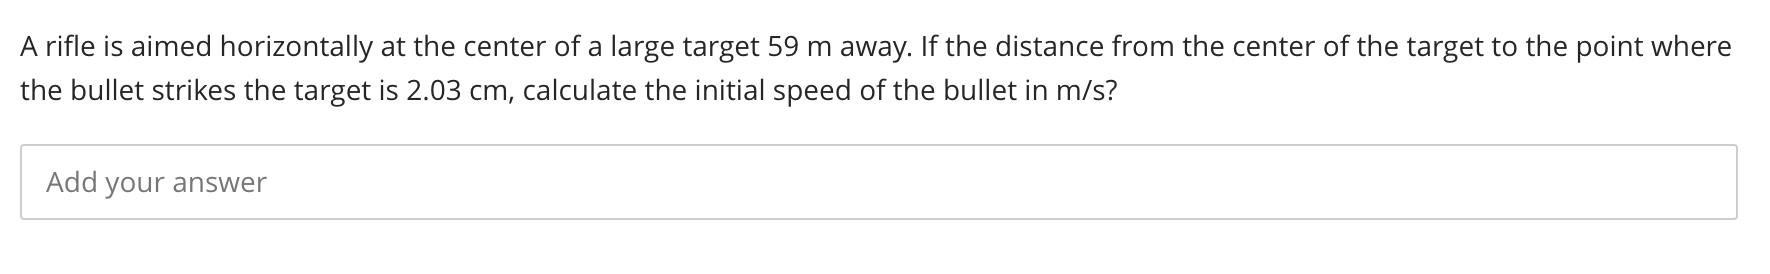 A rifle is aimed horizontally at the center of a large target 59 m away. If the distance from the center of the target to the point where
the bullet strikes the target is 2.03 cm, calculate the initial speed of the bullet in m/s?
